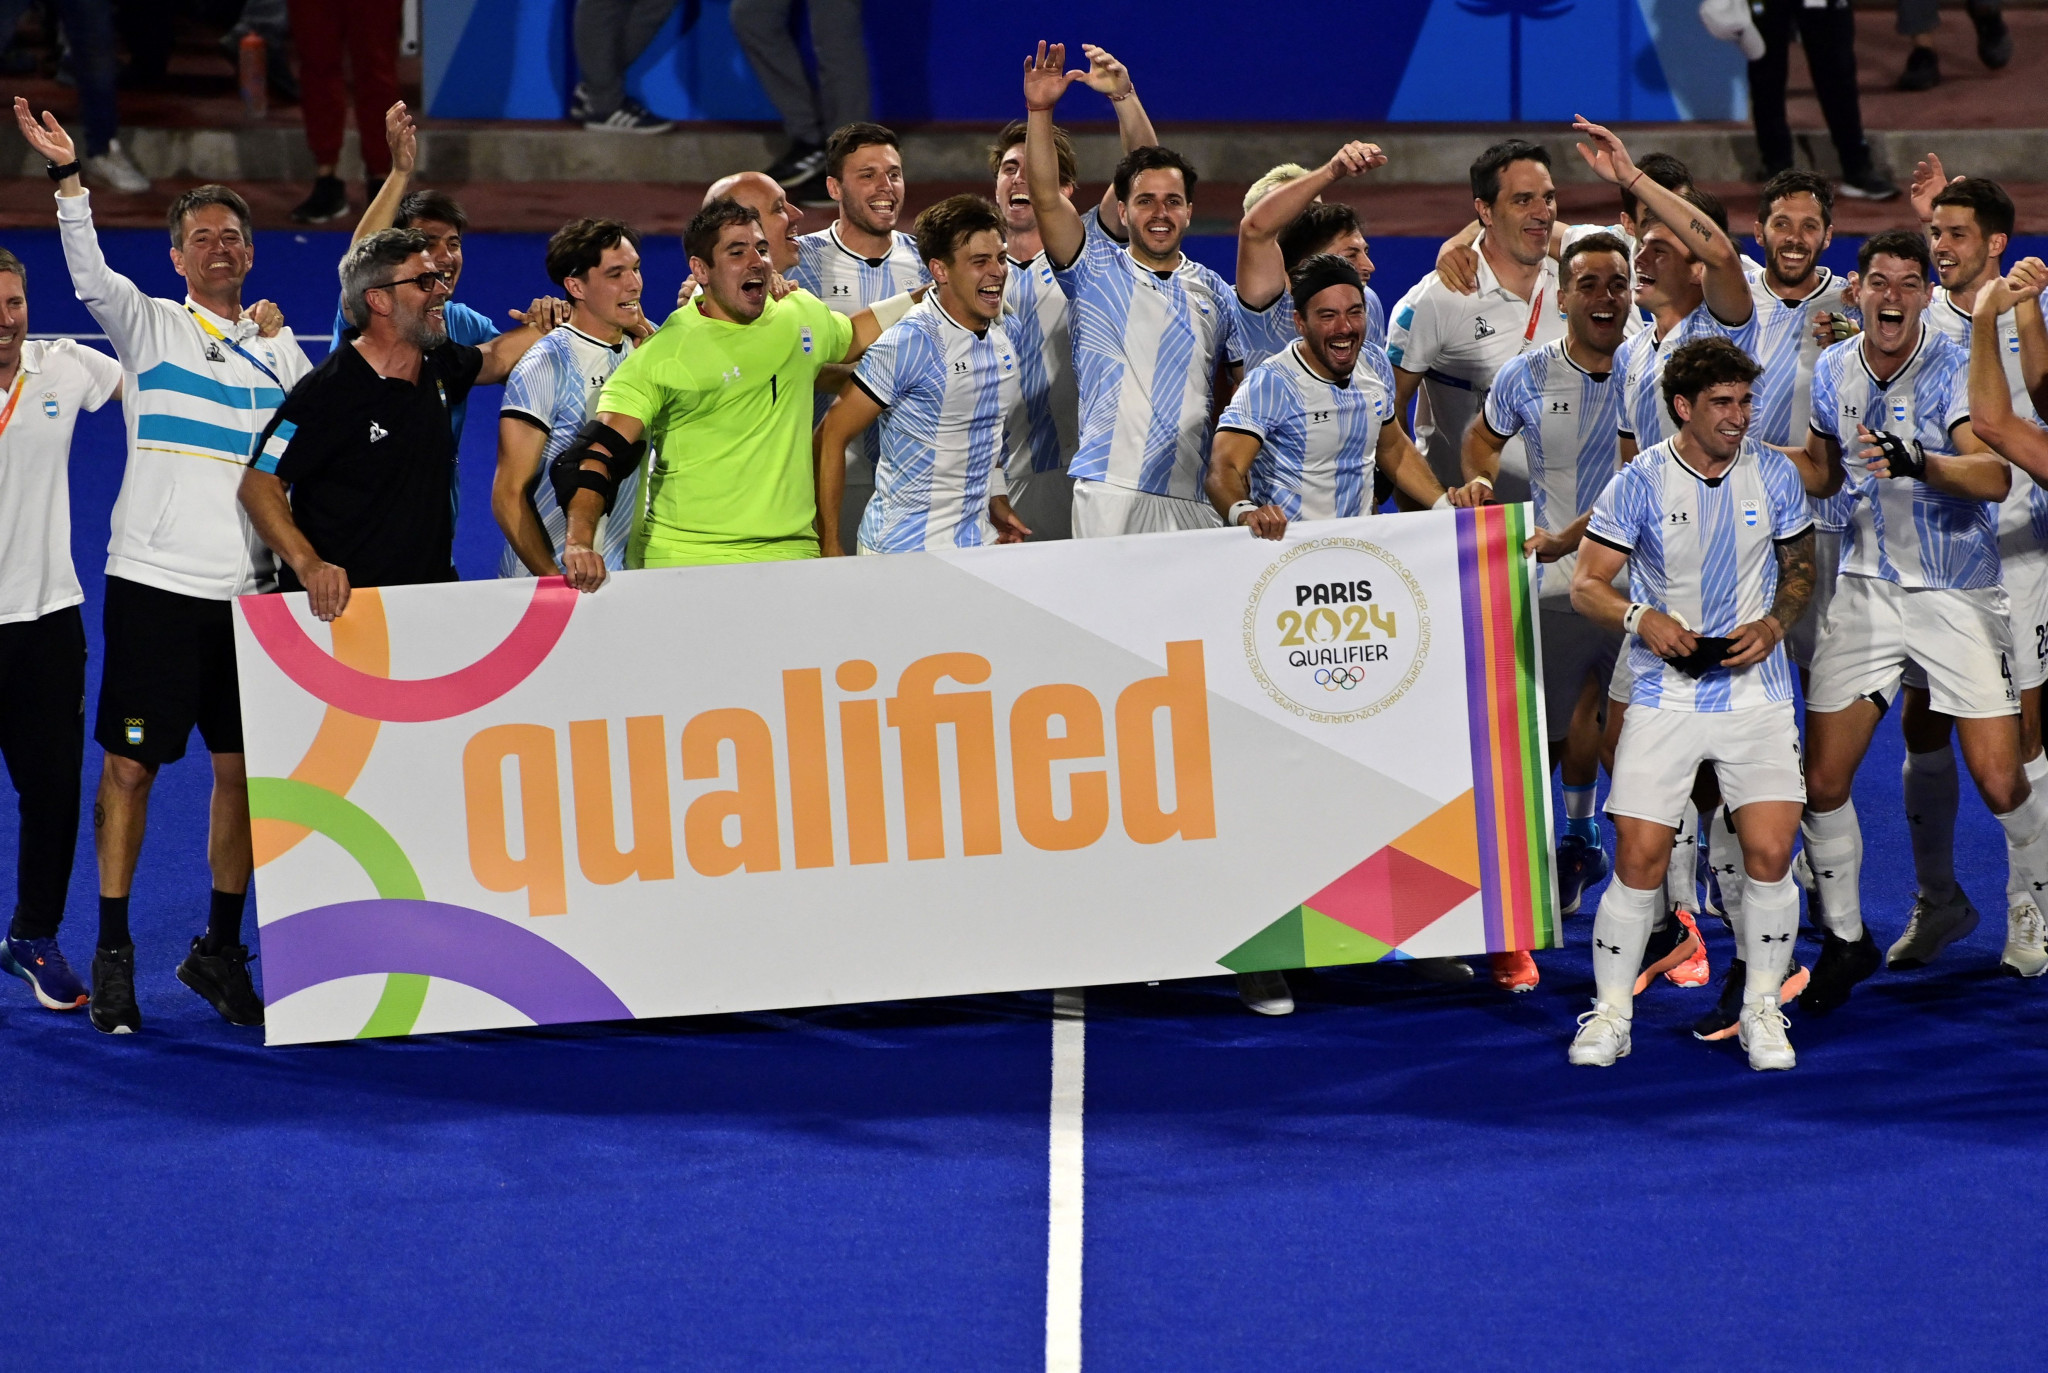 Argentina defeats Chile and reaffirms its dominance in men's field hockey